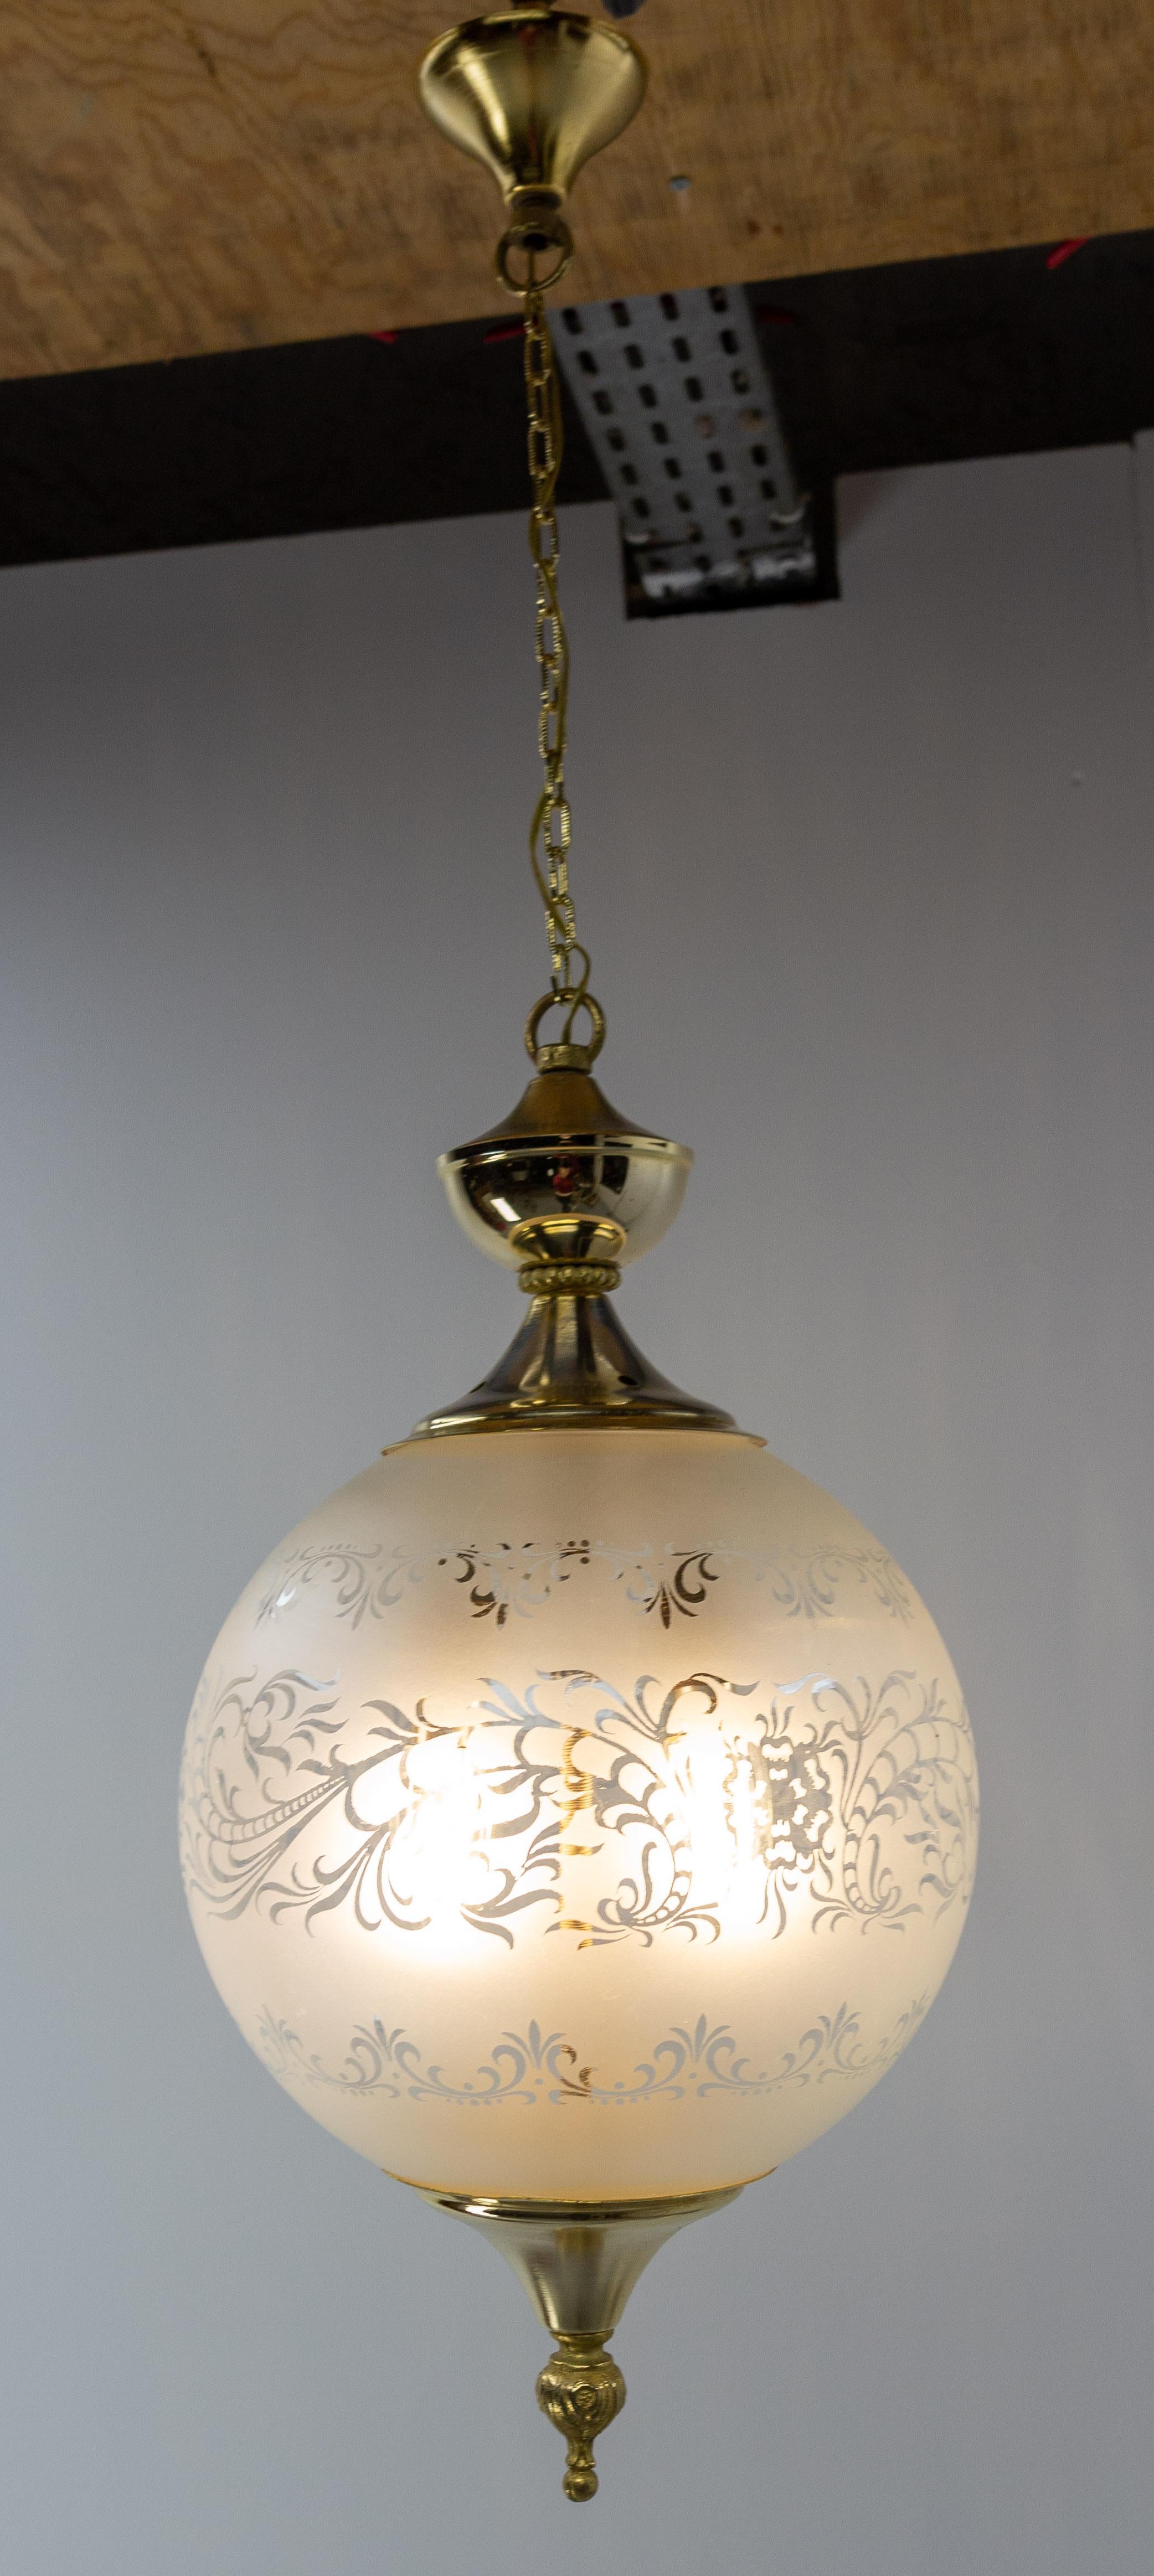 Pendant light chandelier, France, midcentury.
Two bulbs inside the lamp.
The glass globe is decorated of vegetal motifs made by alternating frosted and smooth glass.
Brass and glass, made in France, circa 1970

Good condition

Shipping:
25 /